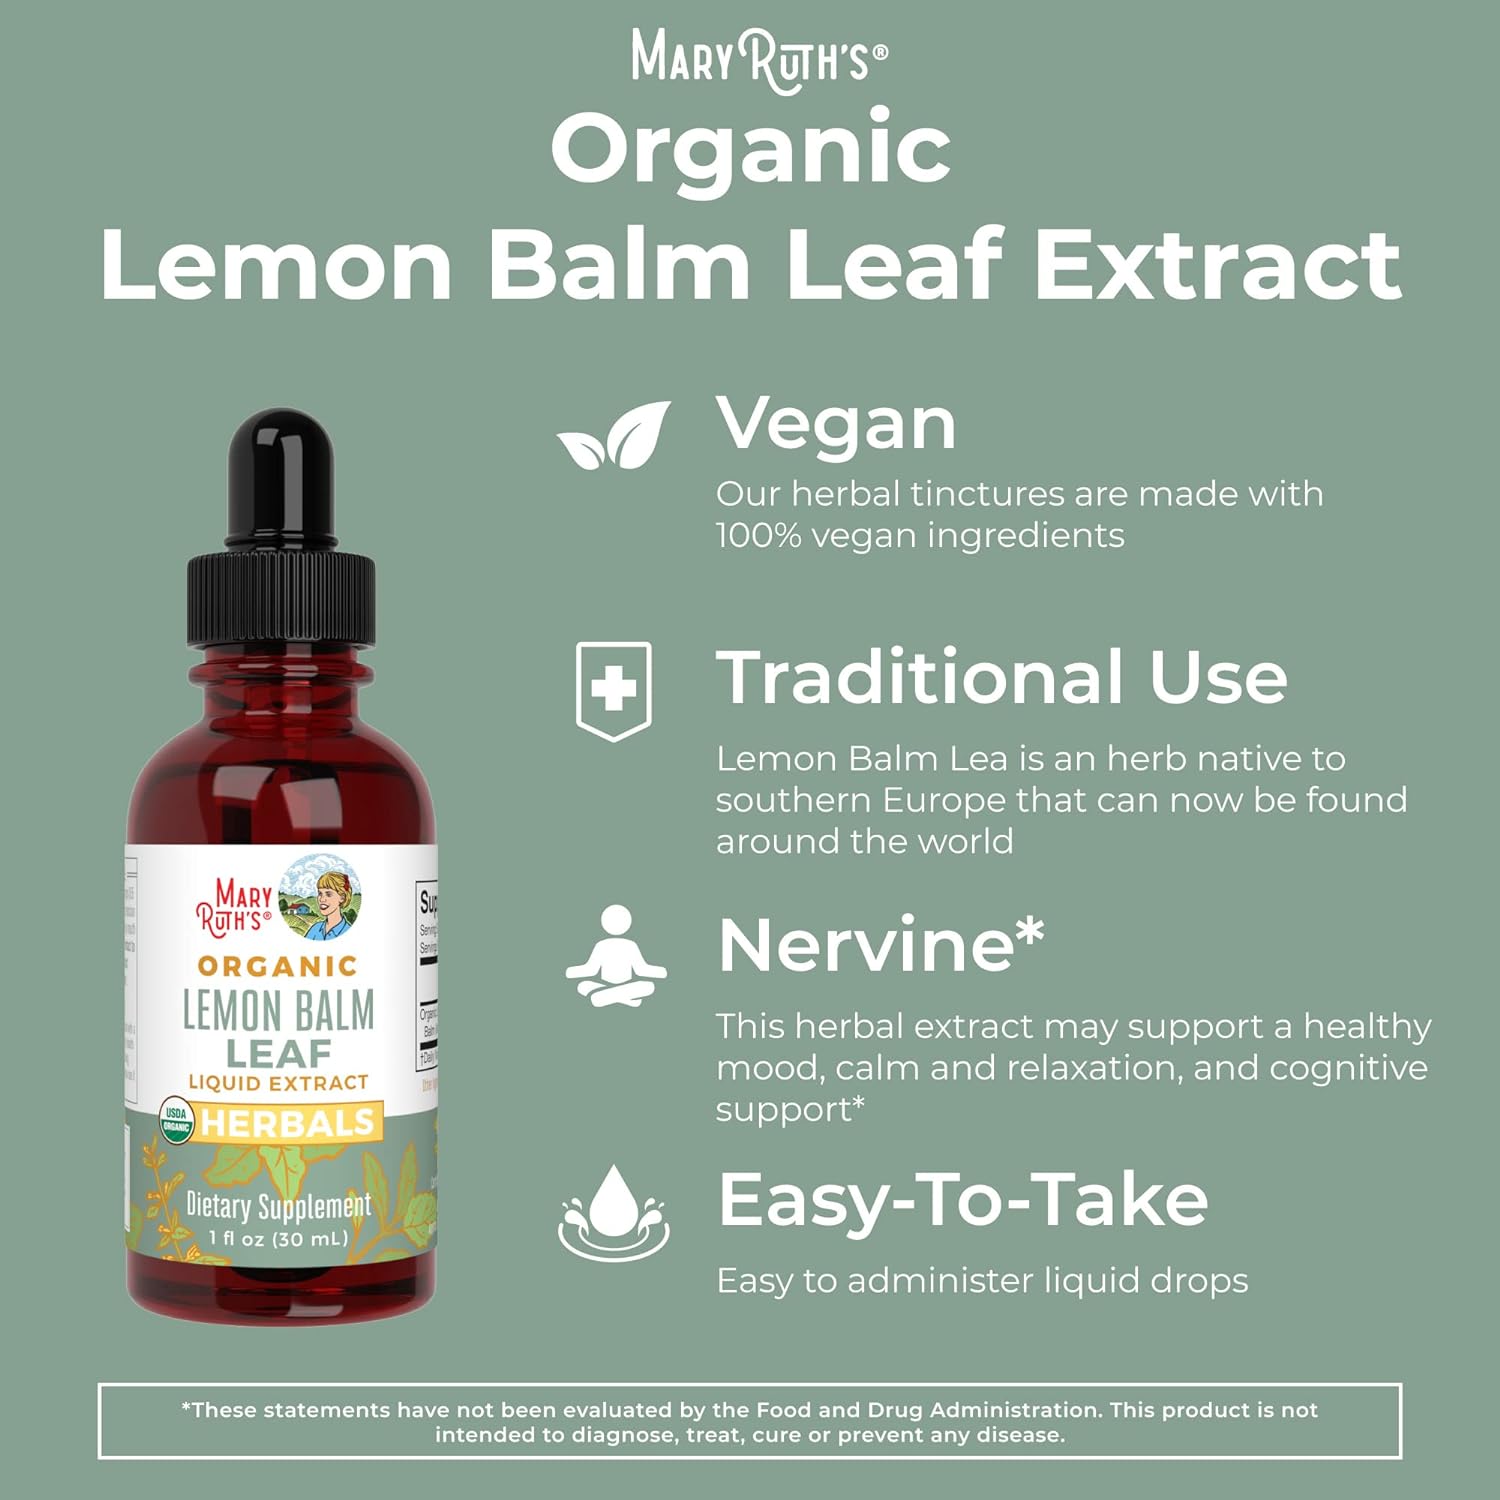 MaryRuth Organics | USDA Organic Lemon Balm Drops | Herbal Supplement for Calming & Cognitive Support | Vegan, Non-Gmo | 1 fl oz / 30ml | Clean Label Project Verified - image 2 of 8